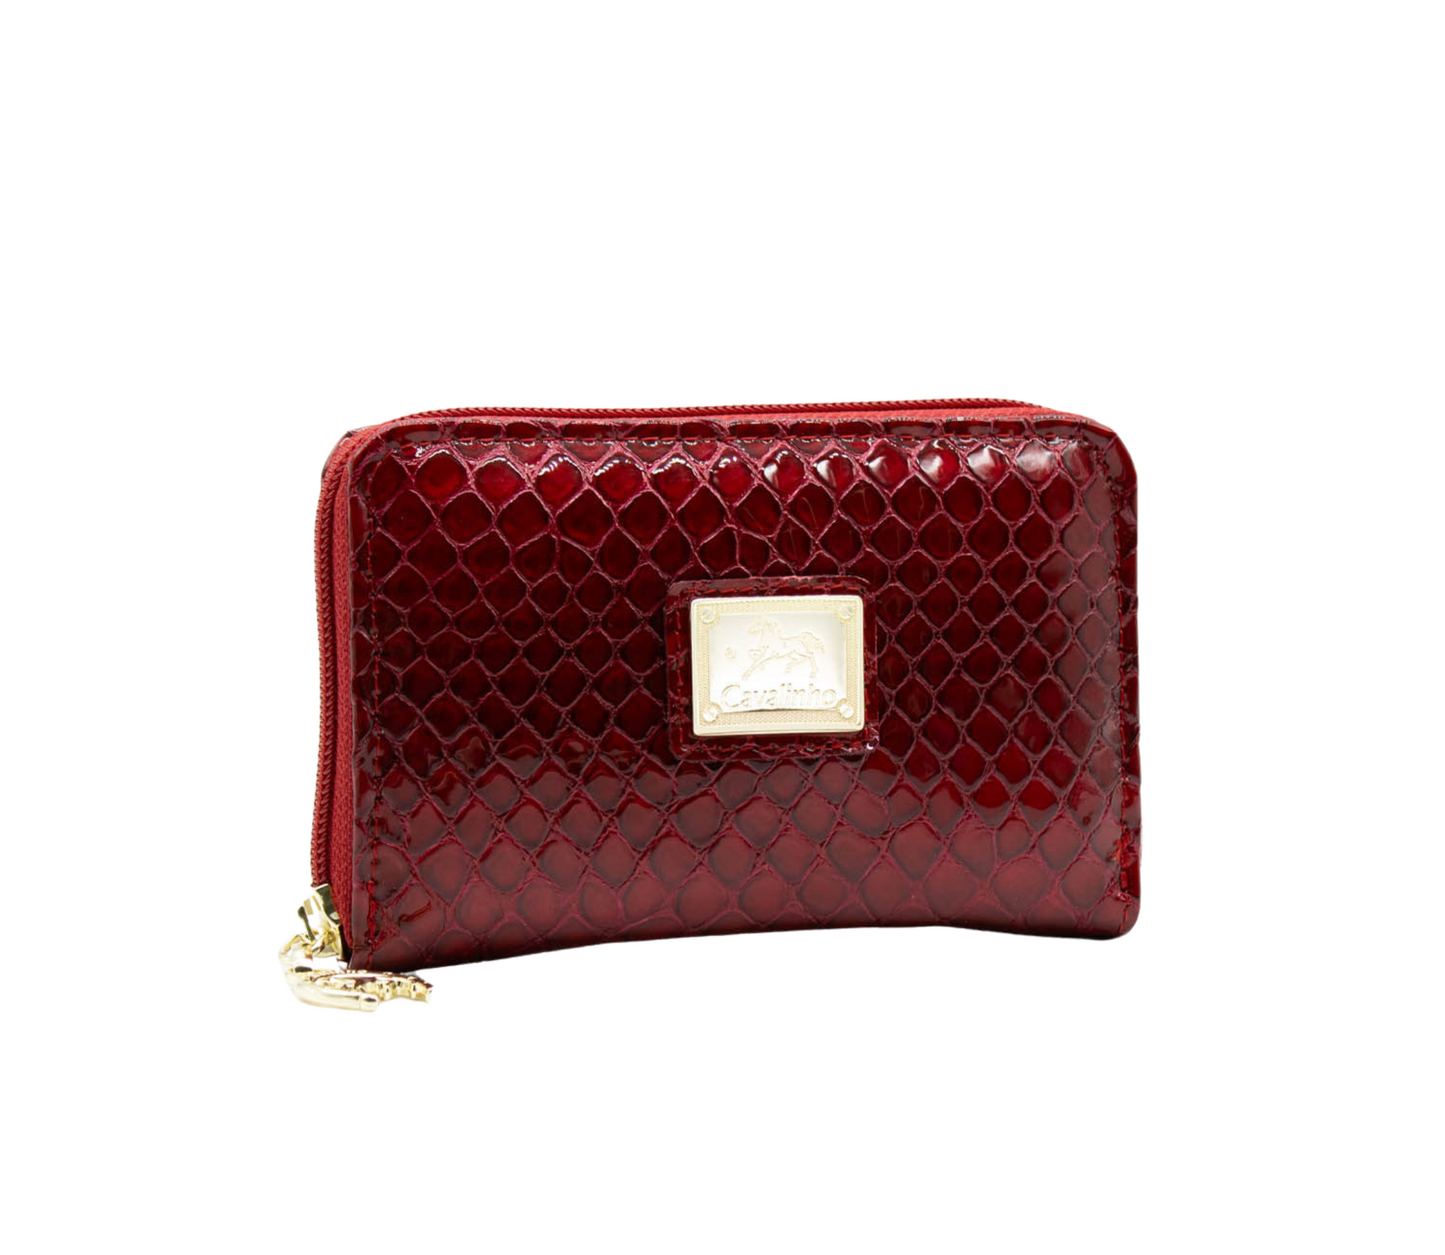 Cavalinho Gallop Patent Leather Card Holder Wallet - Red - 28170217.04_2